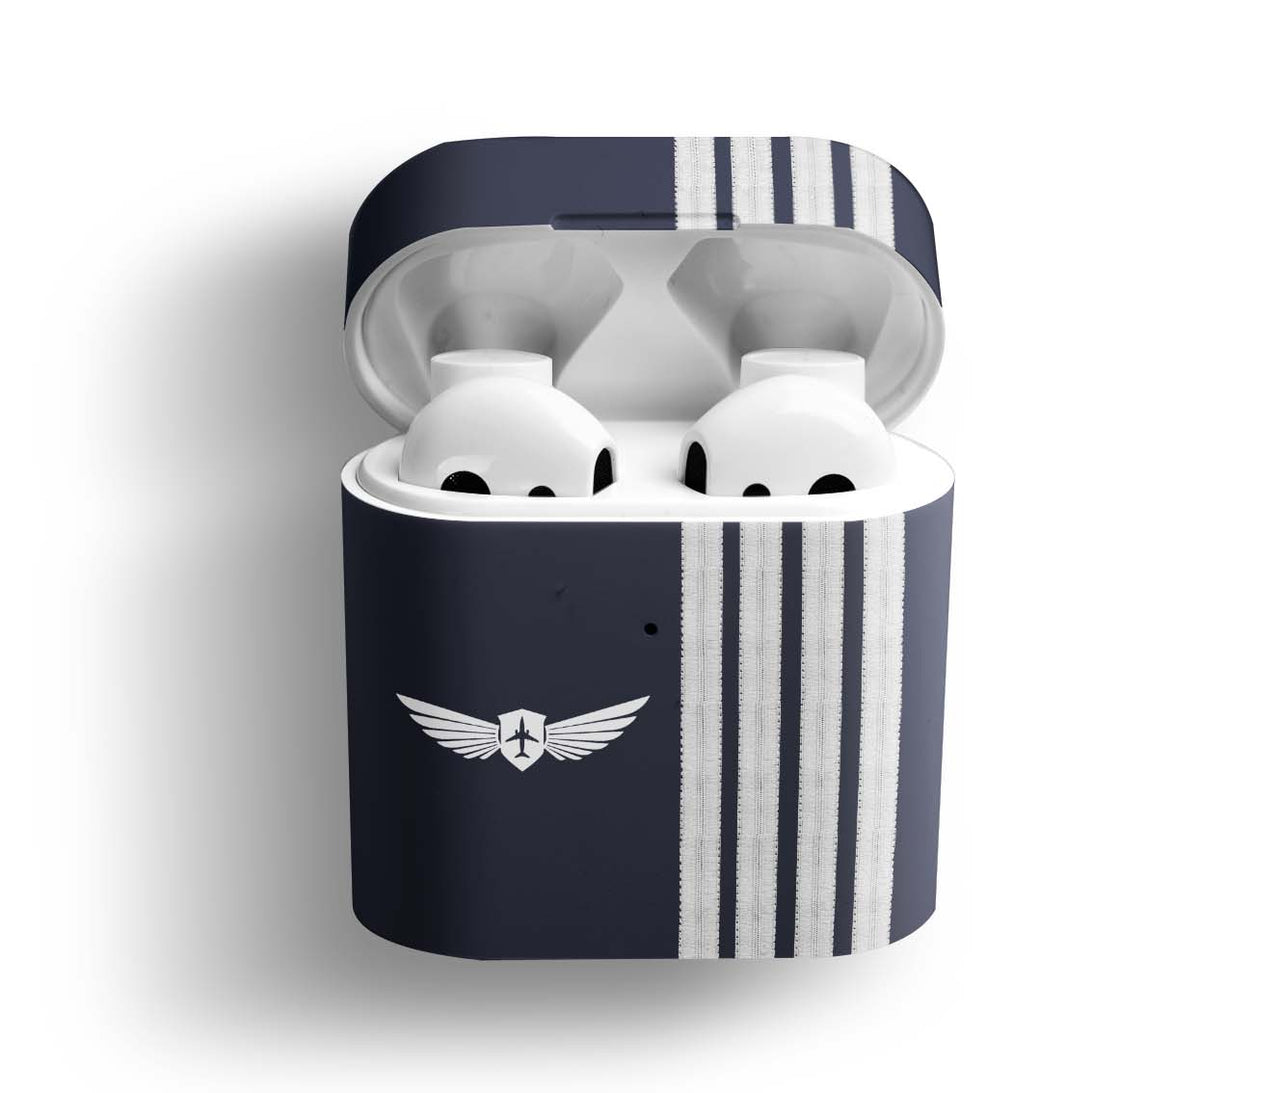 Pilot Badge & Special Silver Epaulettes (4,3,2 Lines) Designed AirPods Cases